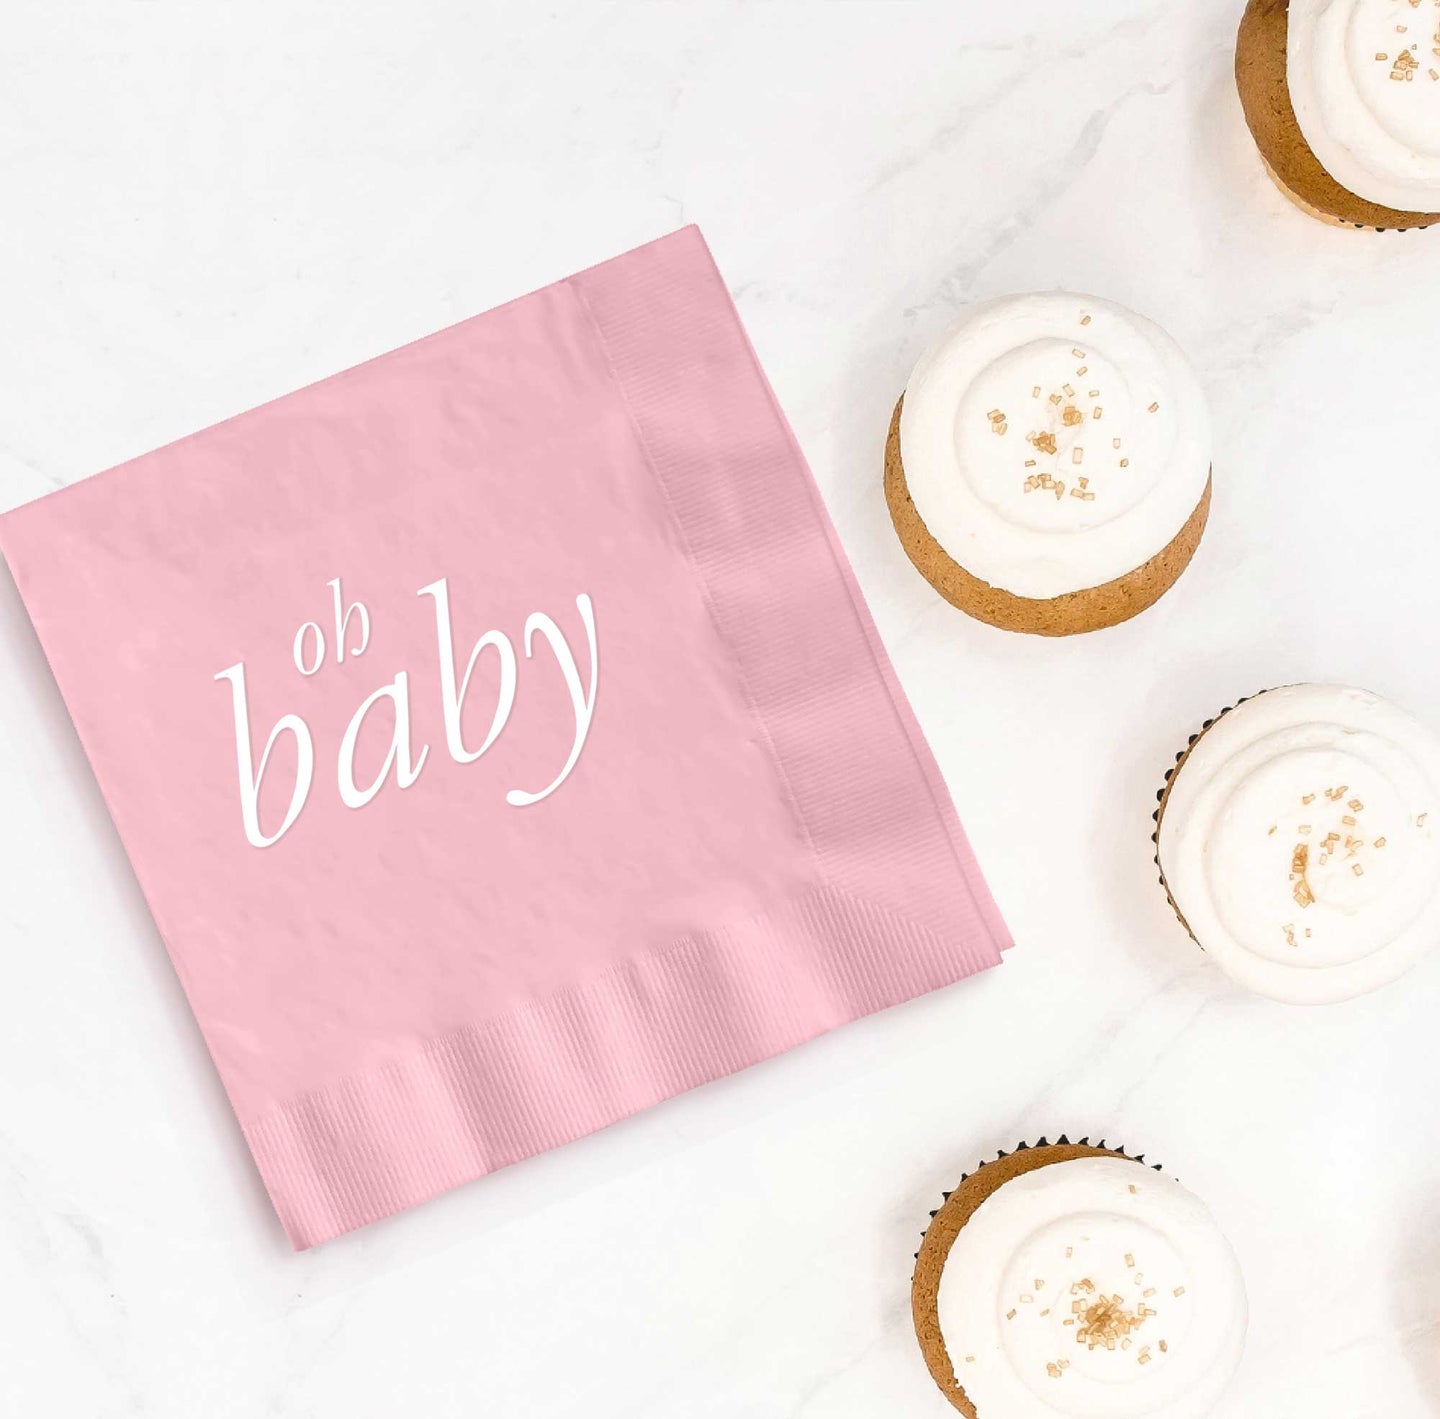 Oh Baby Napkins - Pink - Set of 25 - Tea and Becky